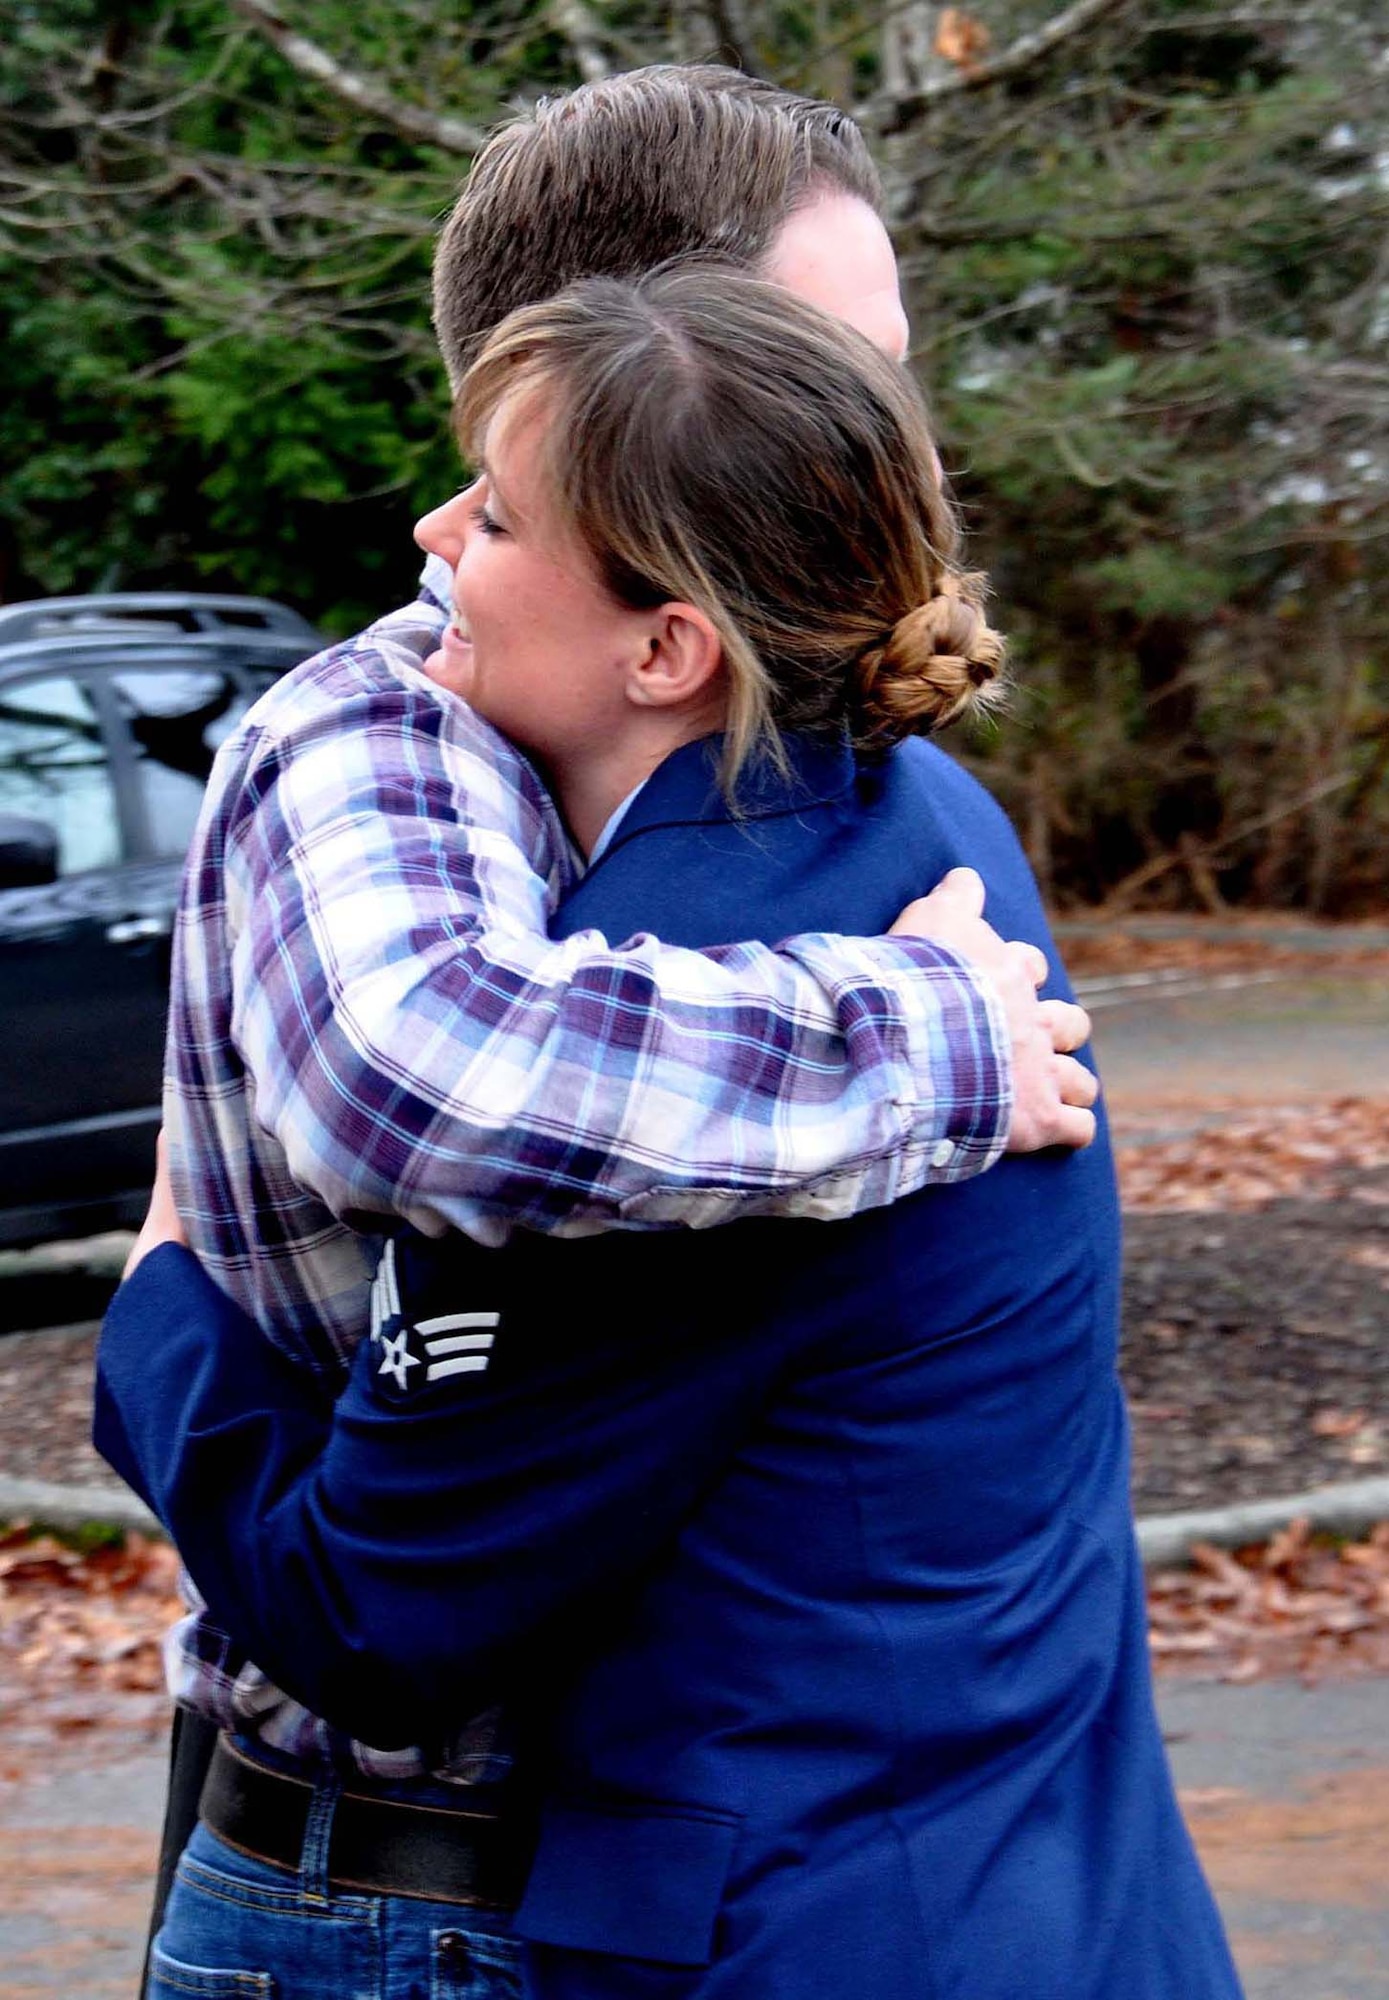 Senior Airman Julie Mann, a health services manager with the 446th Aeromedical Evacuation Squadron here, hugs her older brother 2nd Lt. Nathan Mann, Dec. 28. He is a maintenance officer with the 129th Maintenance Group at Moffett Field, Calif. Mann came to base in civilian attire to avoid being saluted by other Airmen so his younger sister would be the first to salute him as a new officer.  (U.S. Air Force Photo/Airman 1st Class Madelyn McCullough)